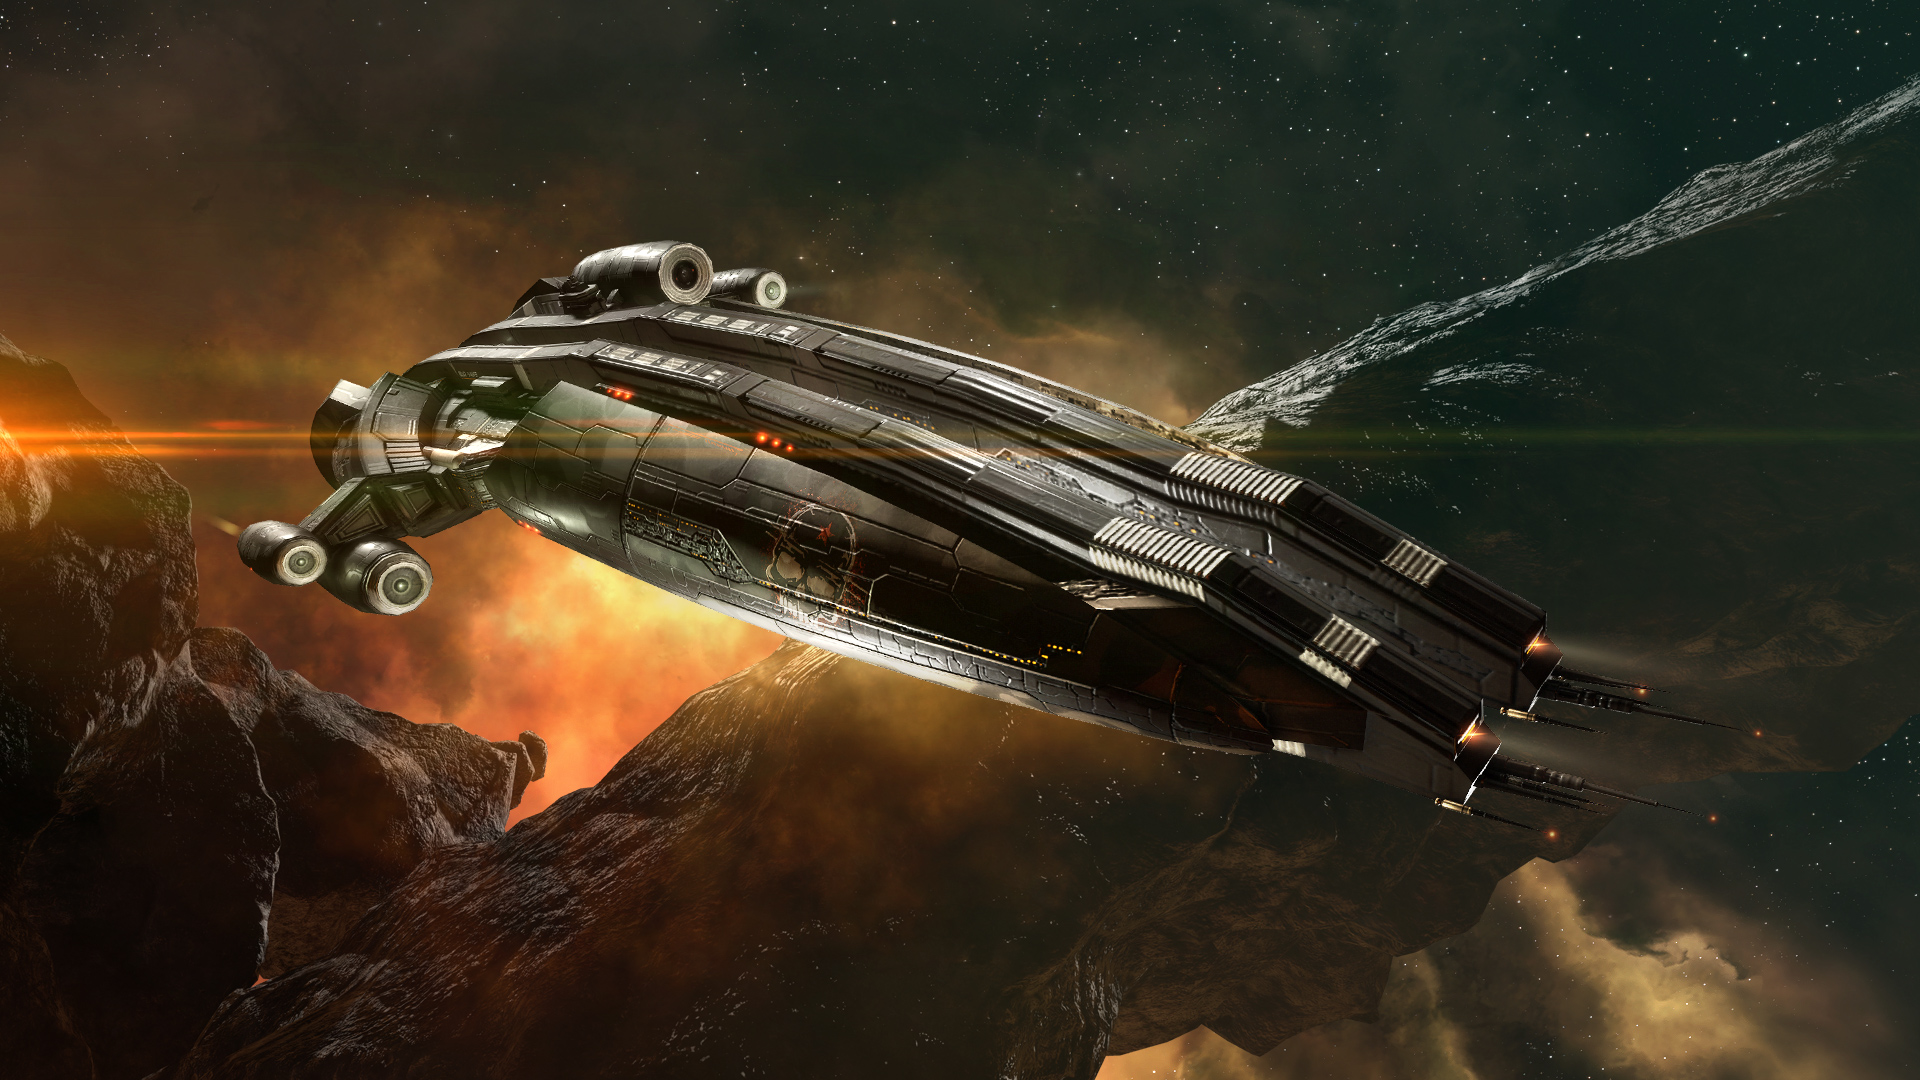 Markee Dragon Game Codes - Eve Online Insurgent Commander Pack